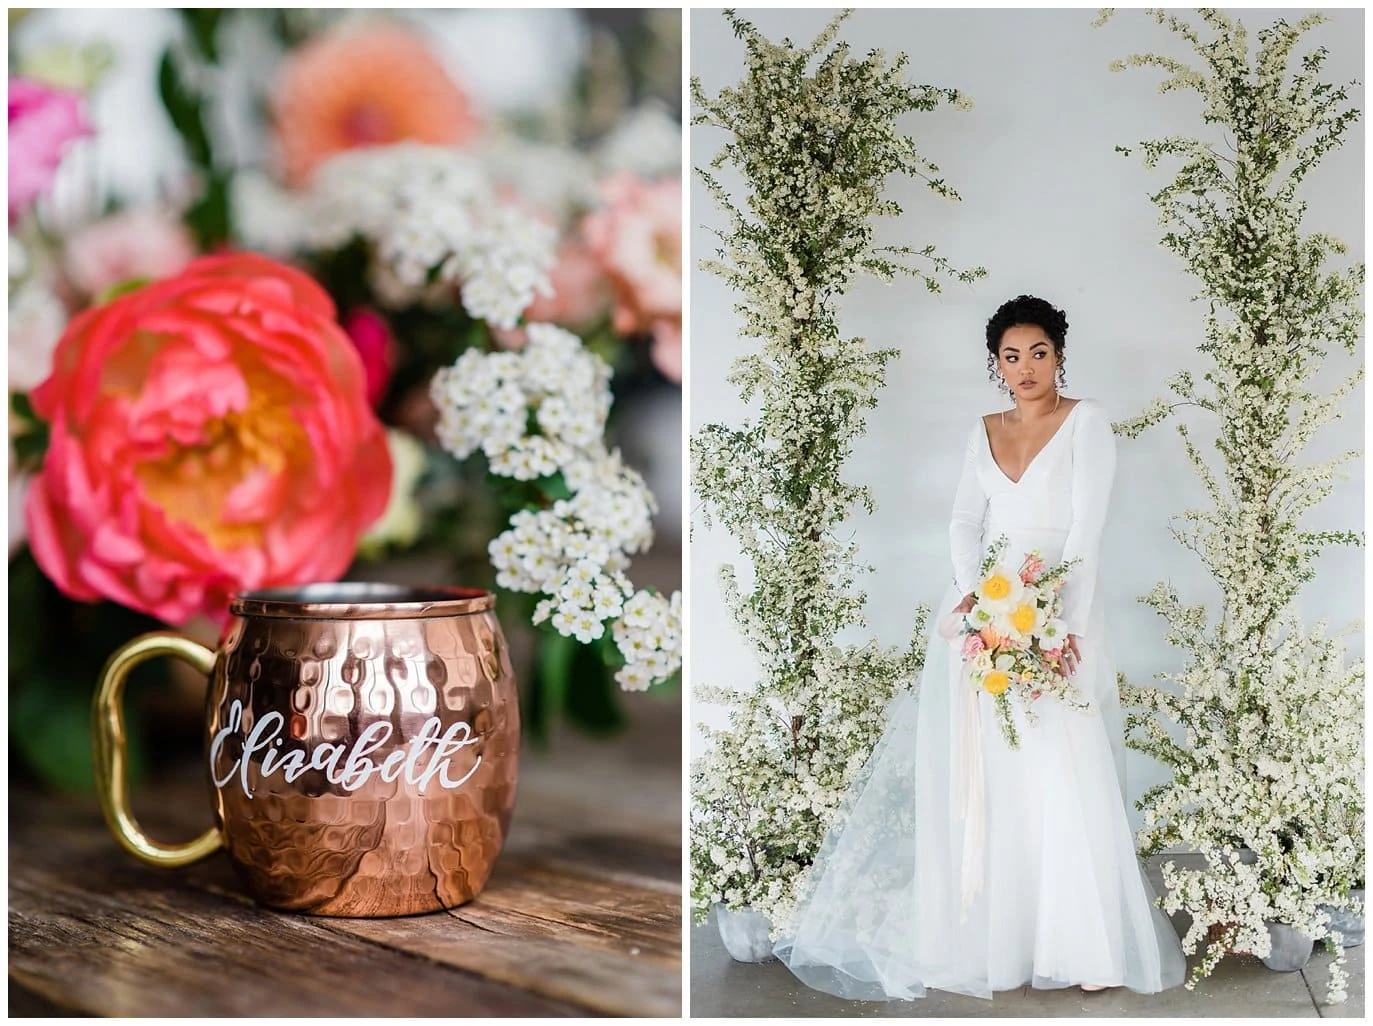 painted copper mug and single flower alter inspiration at summer blanc wedding by blanc wedding photographer Jennie Crate photographer